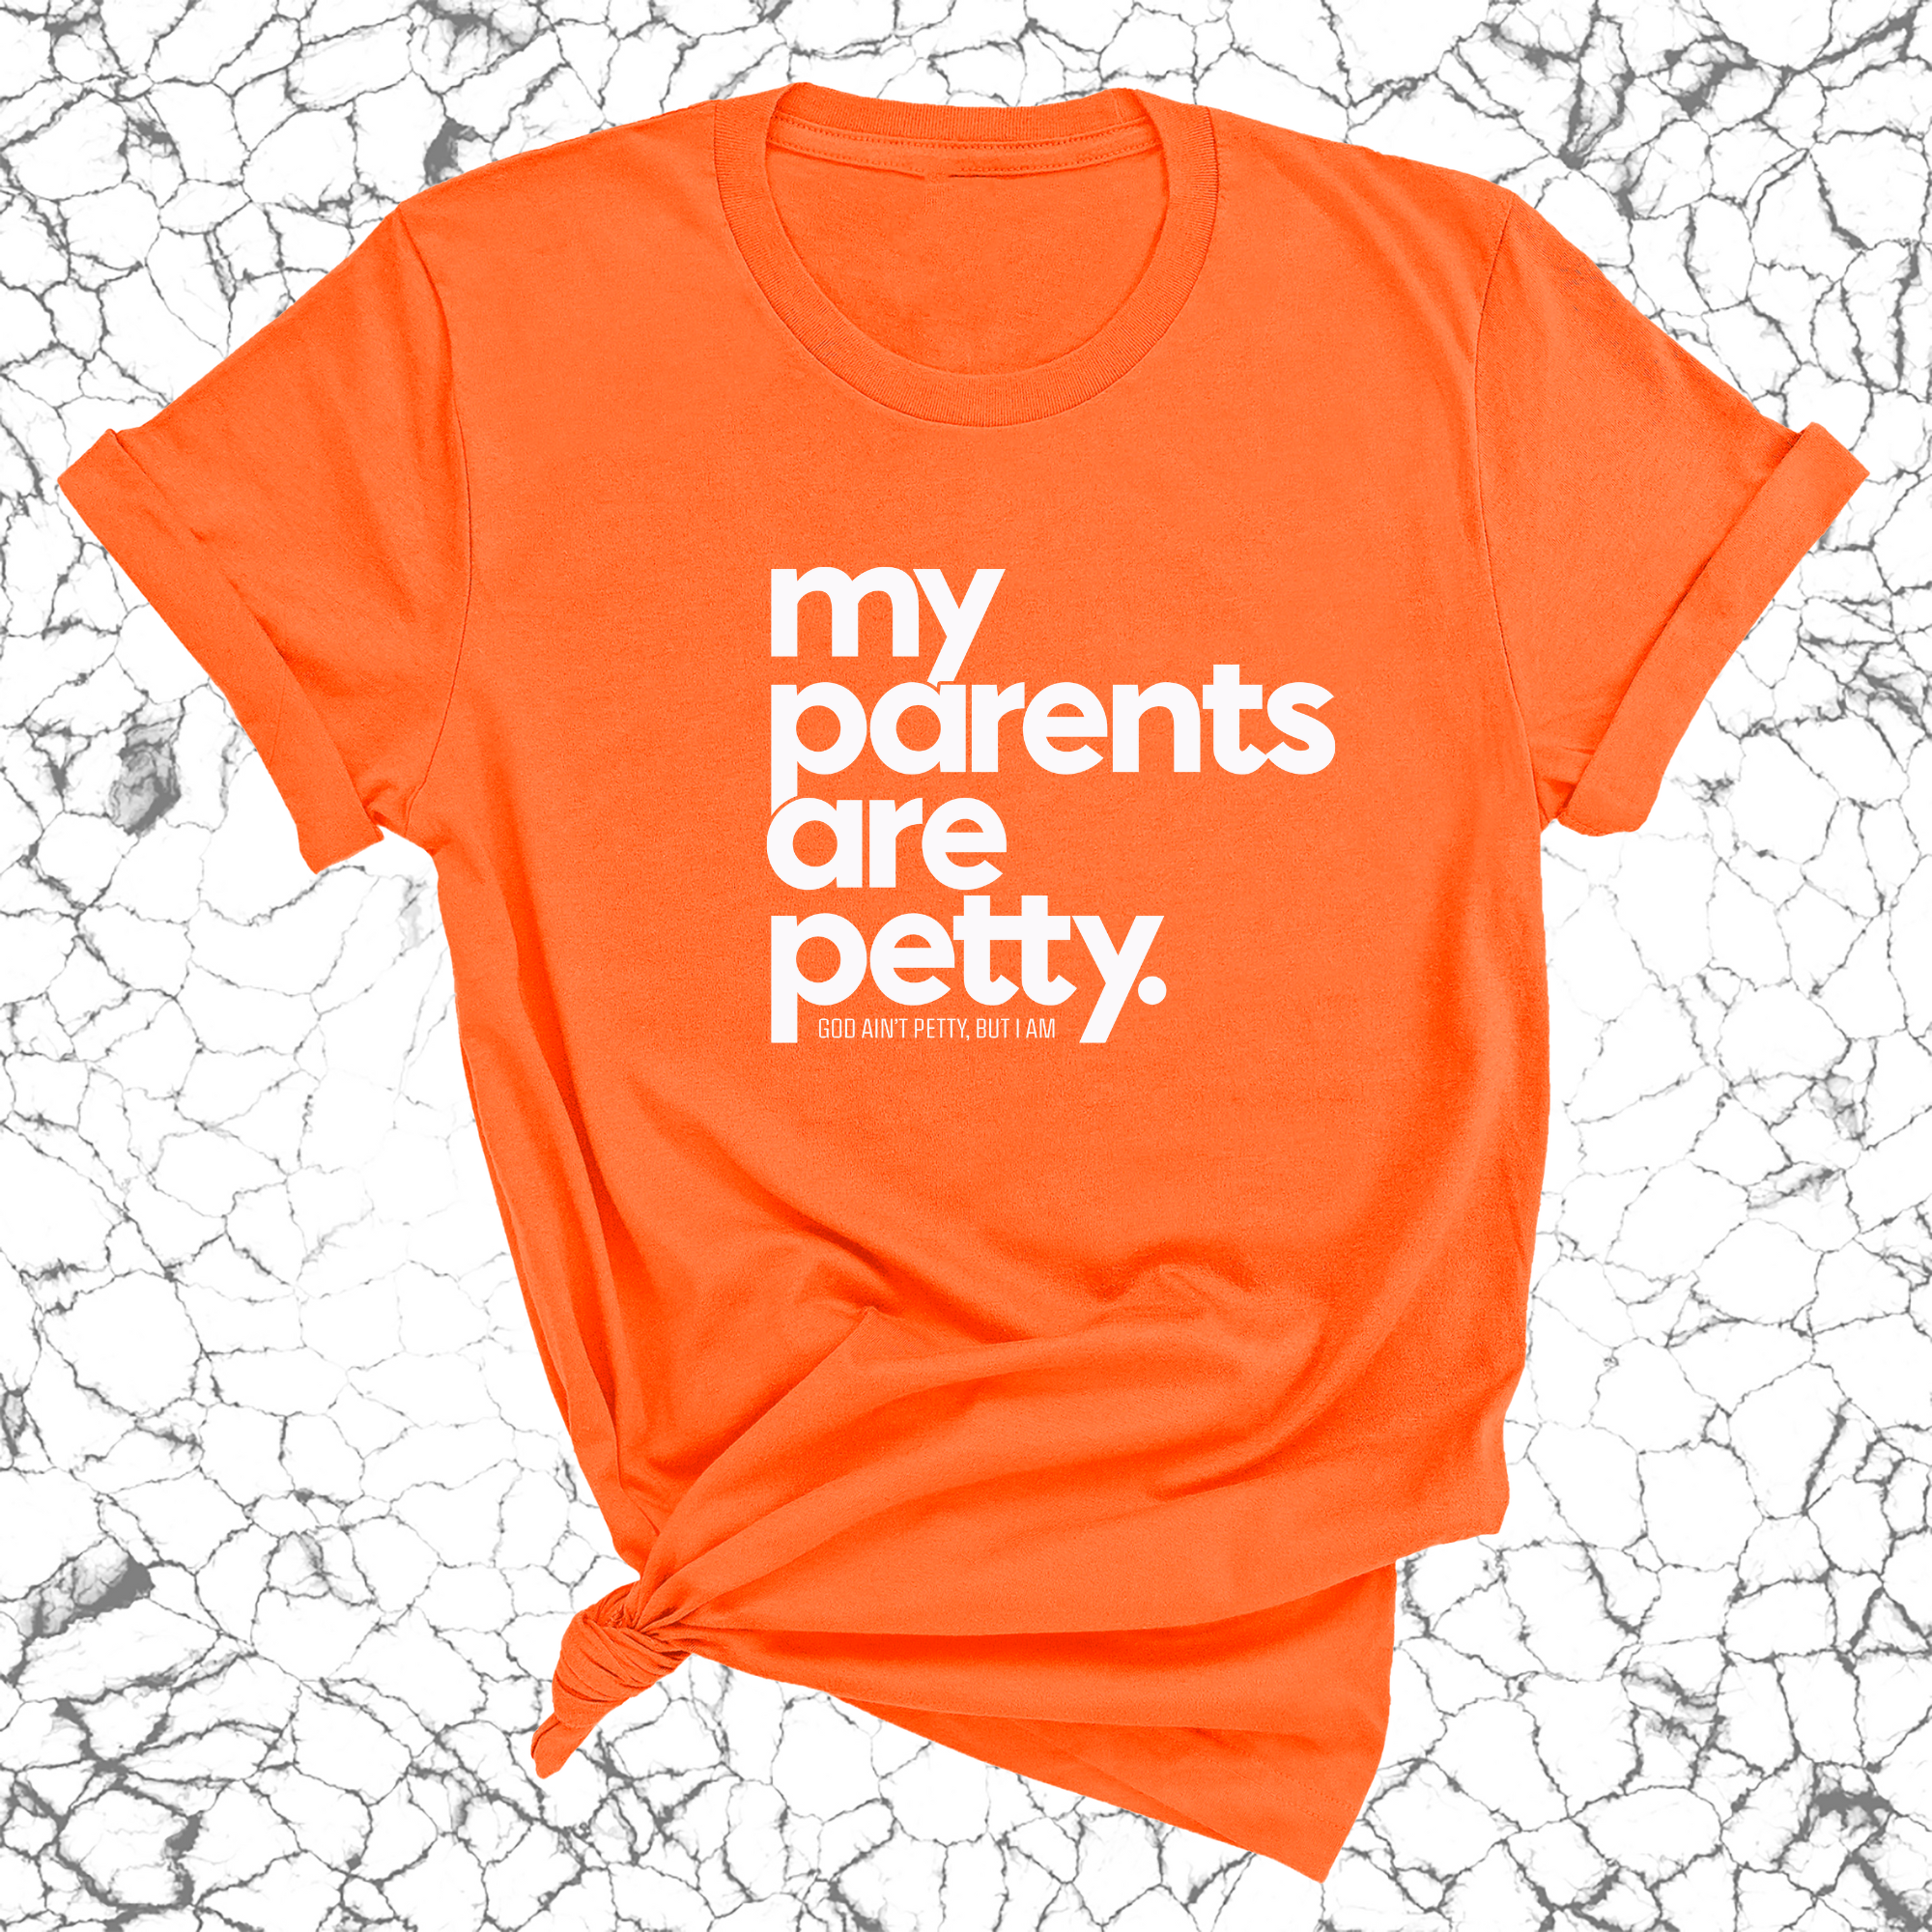 My parents are petty Unisex Tee-T-Shirt-The Original God Ain't Petty But I Am